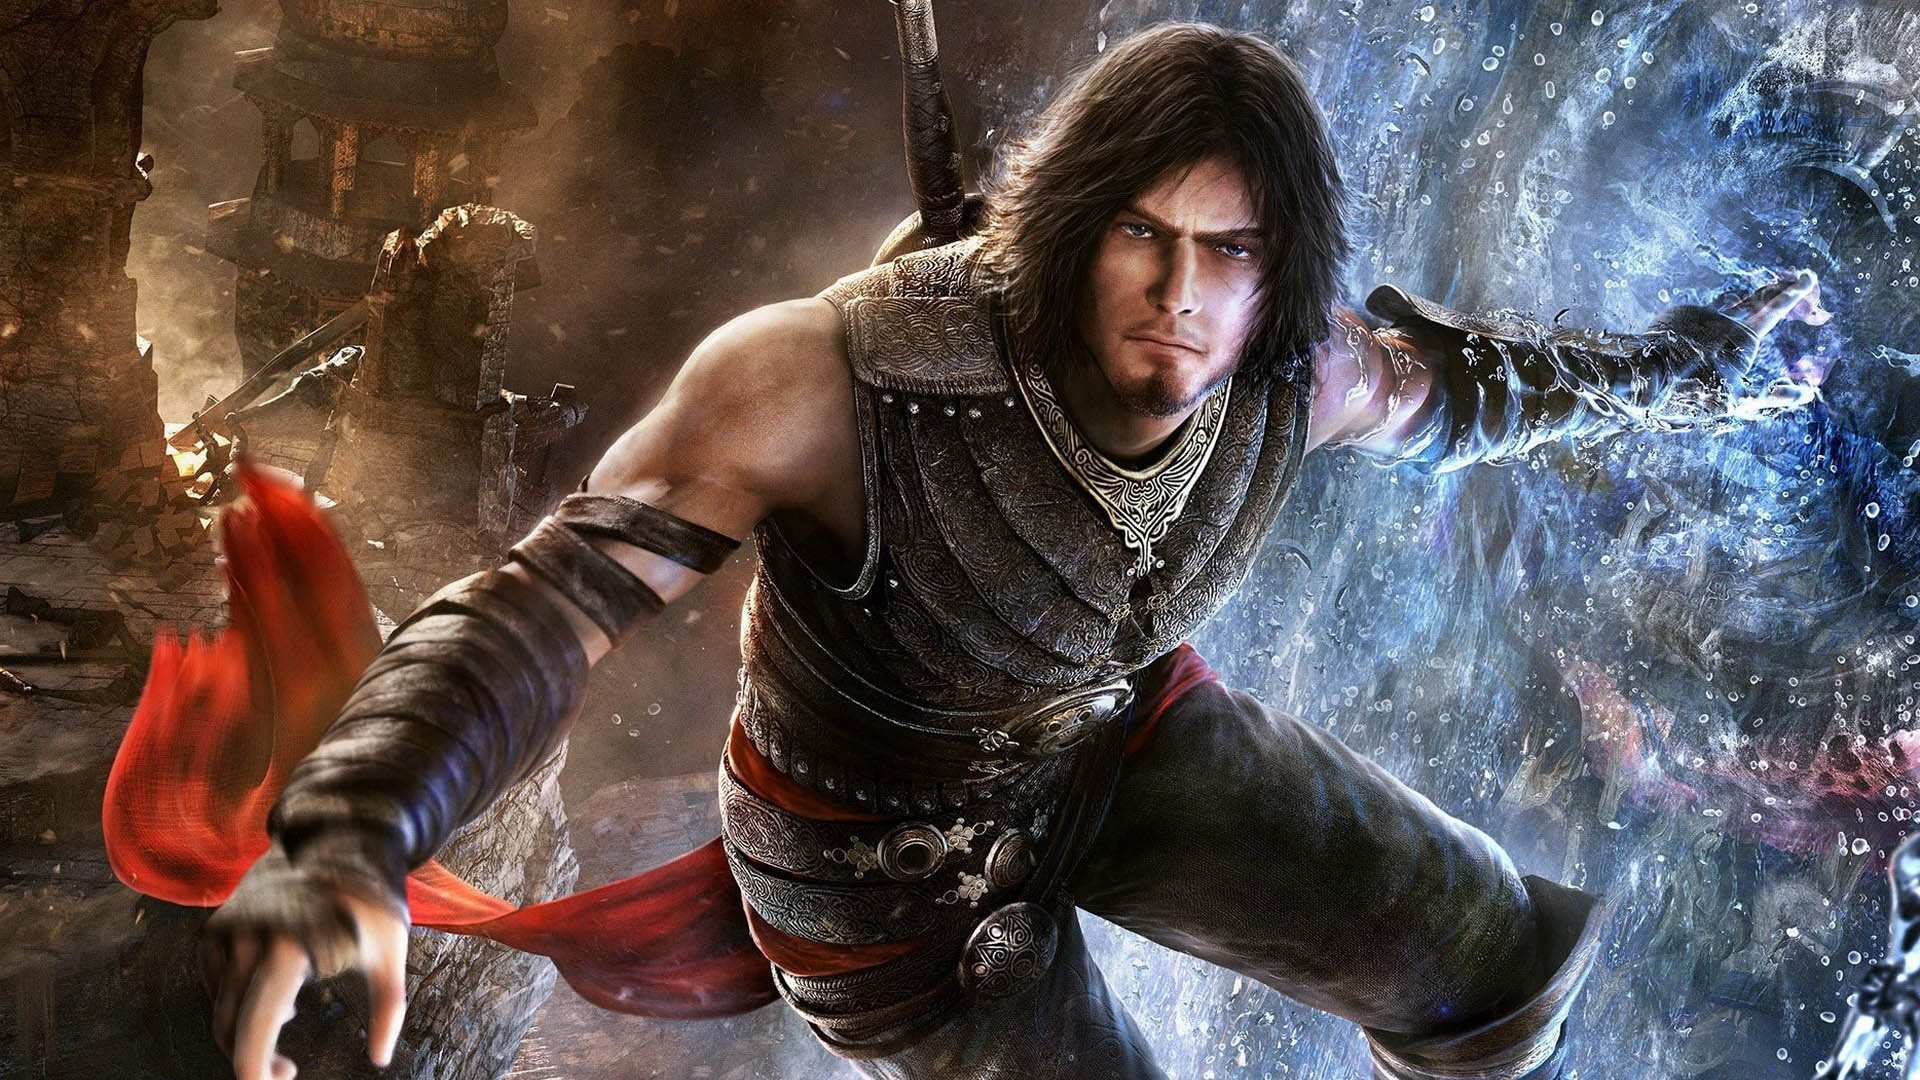 First Prince of Persia movie pics surface - GameSpot